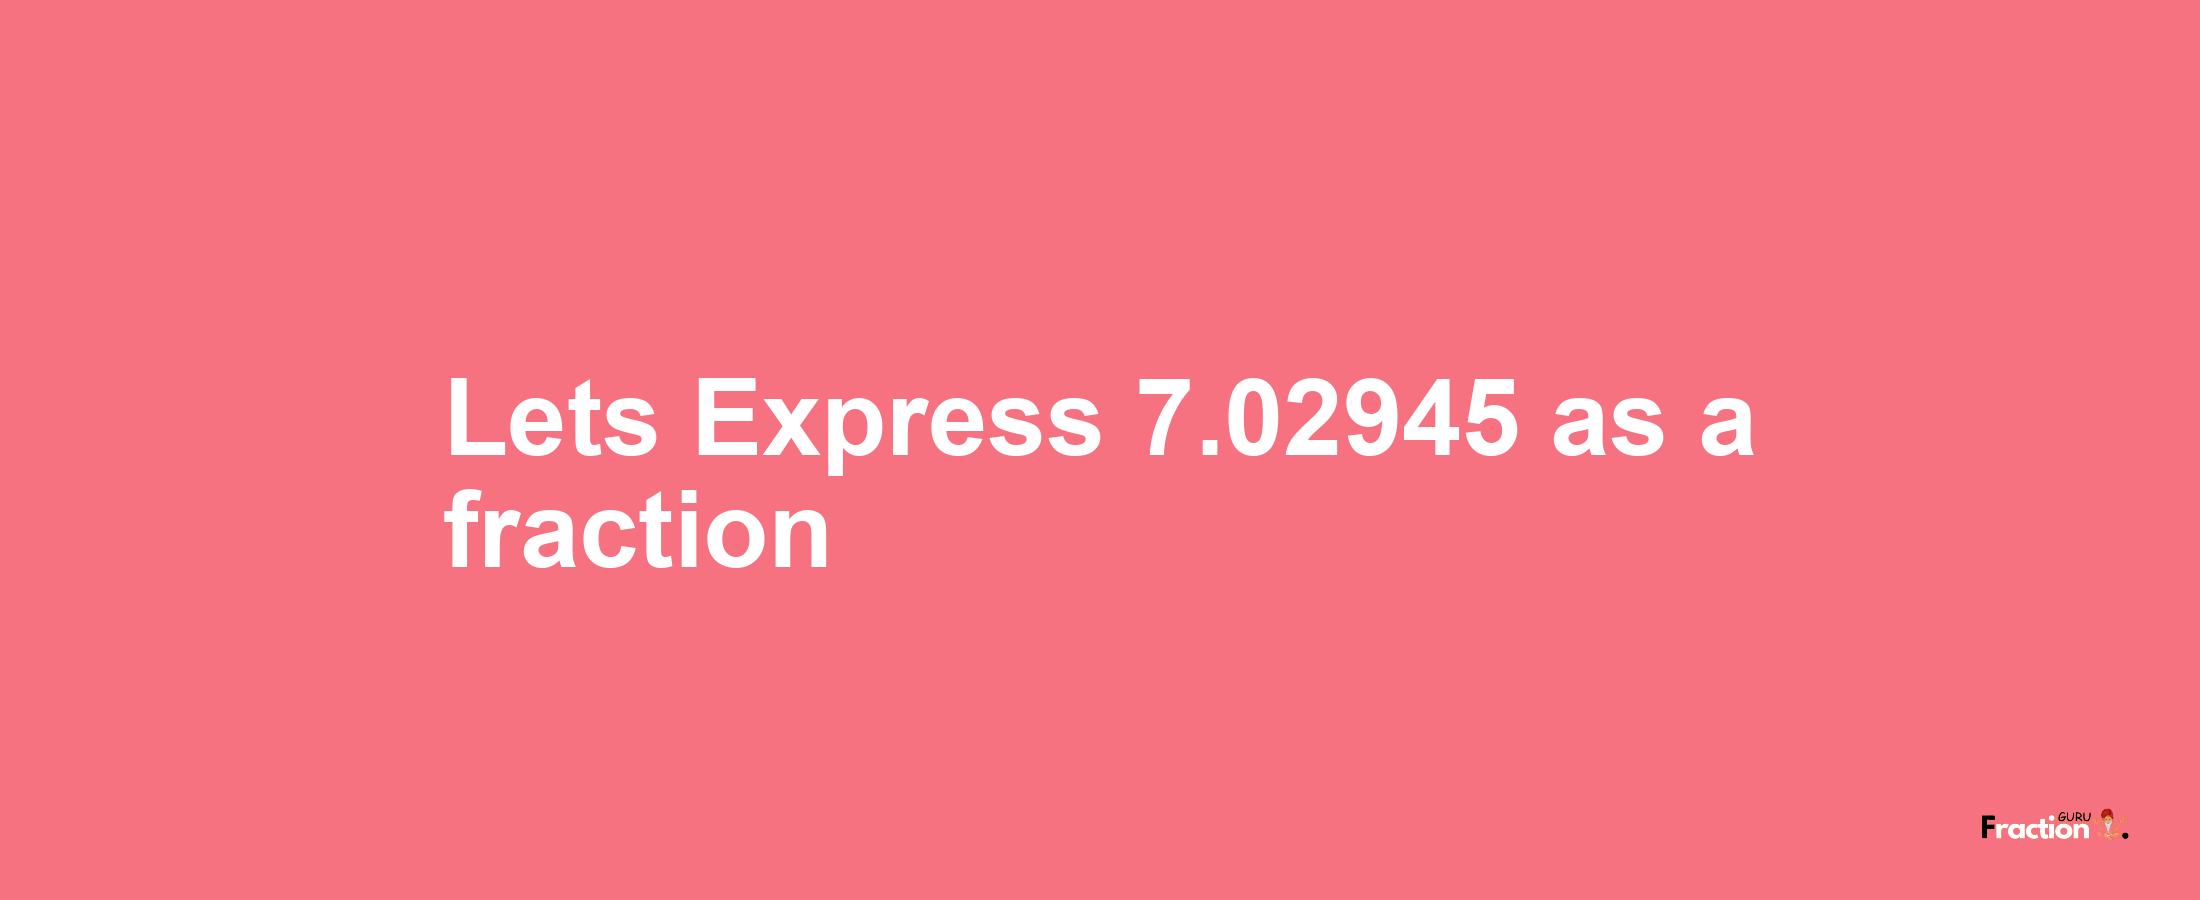 Lets Express 7.02945 as afraction